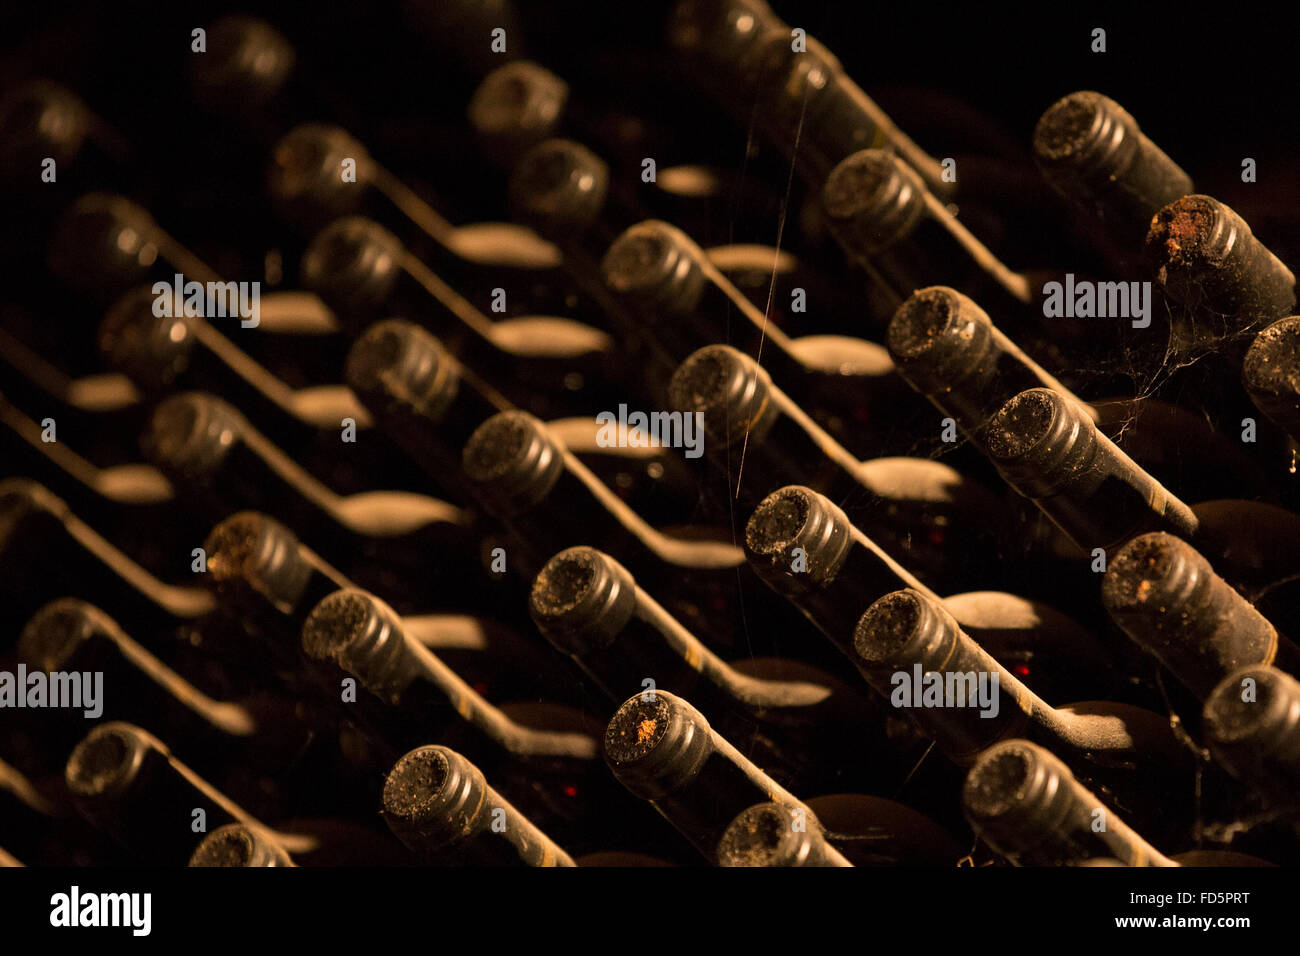 Interior of old wines cellar. Wood decorations Stock Photo - Alamy